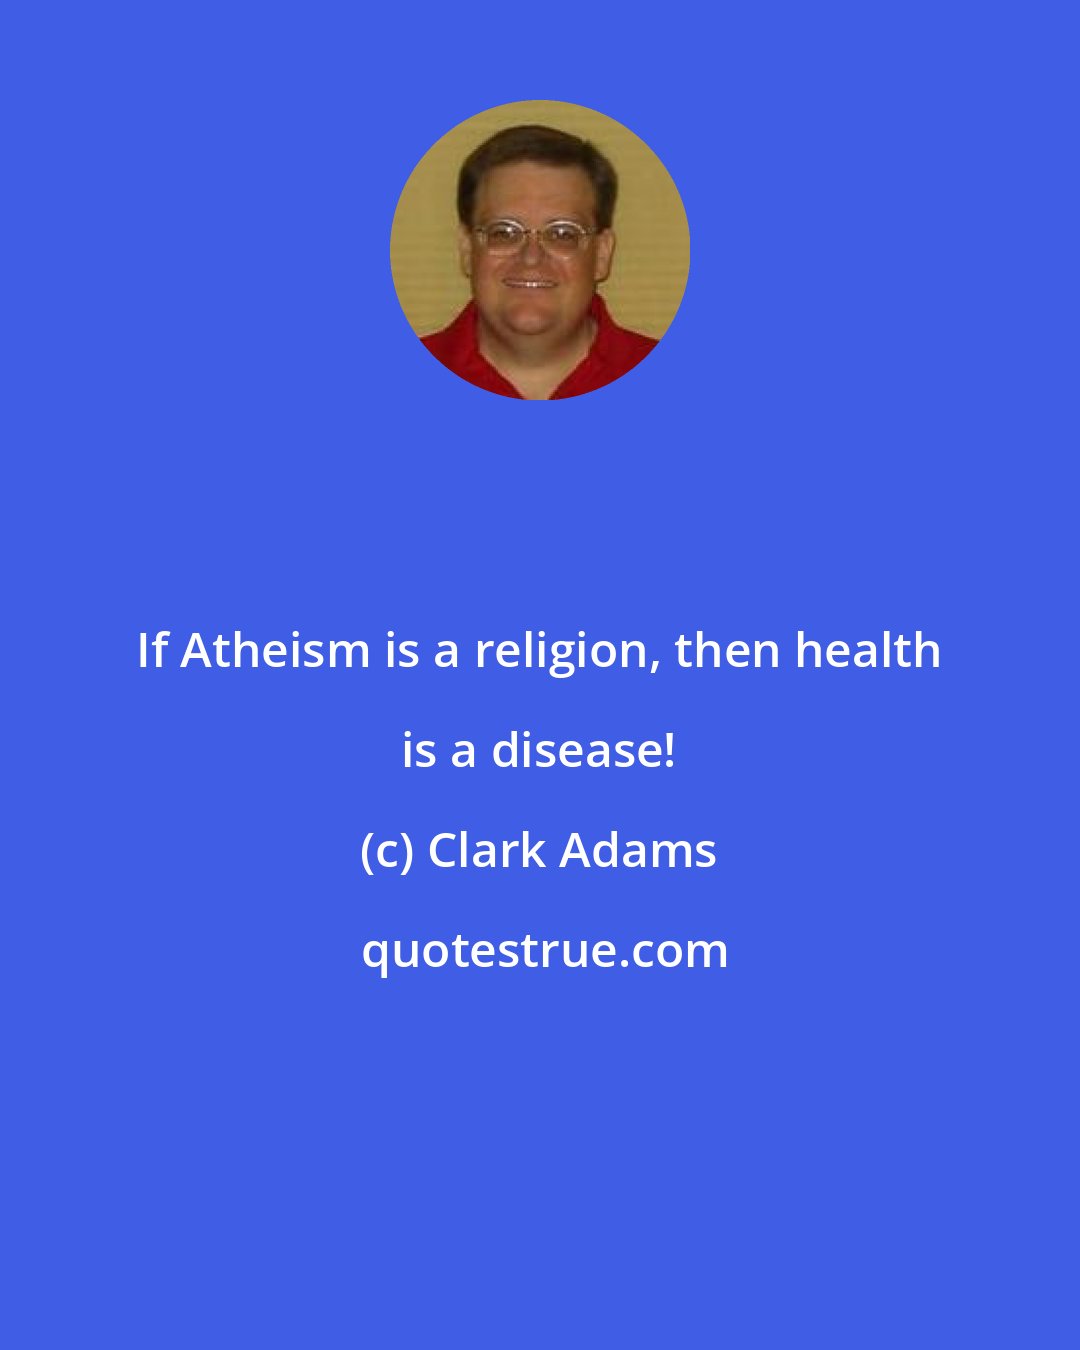 Clark Adams: If Atheism is a religion, then health is a disease!